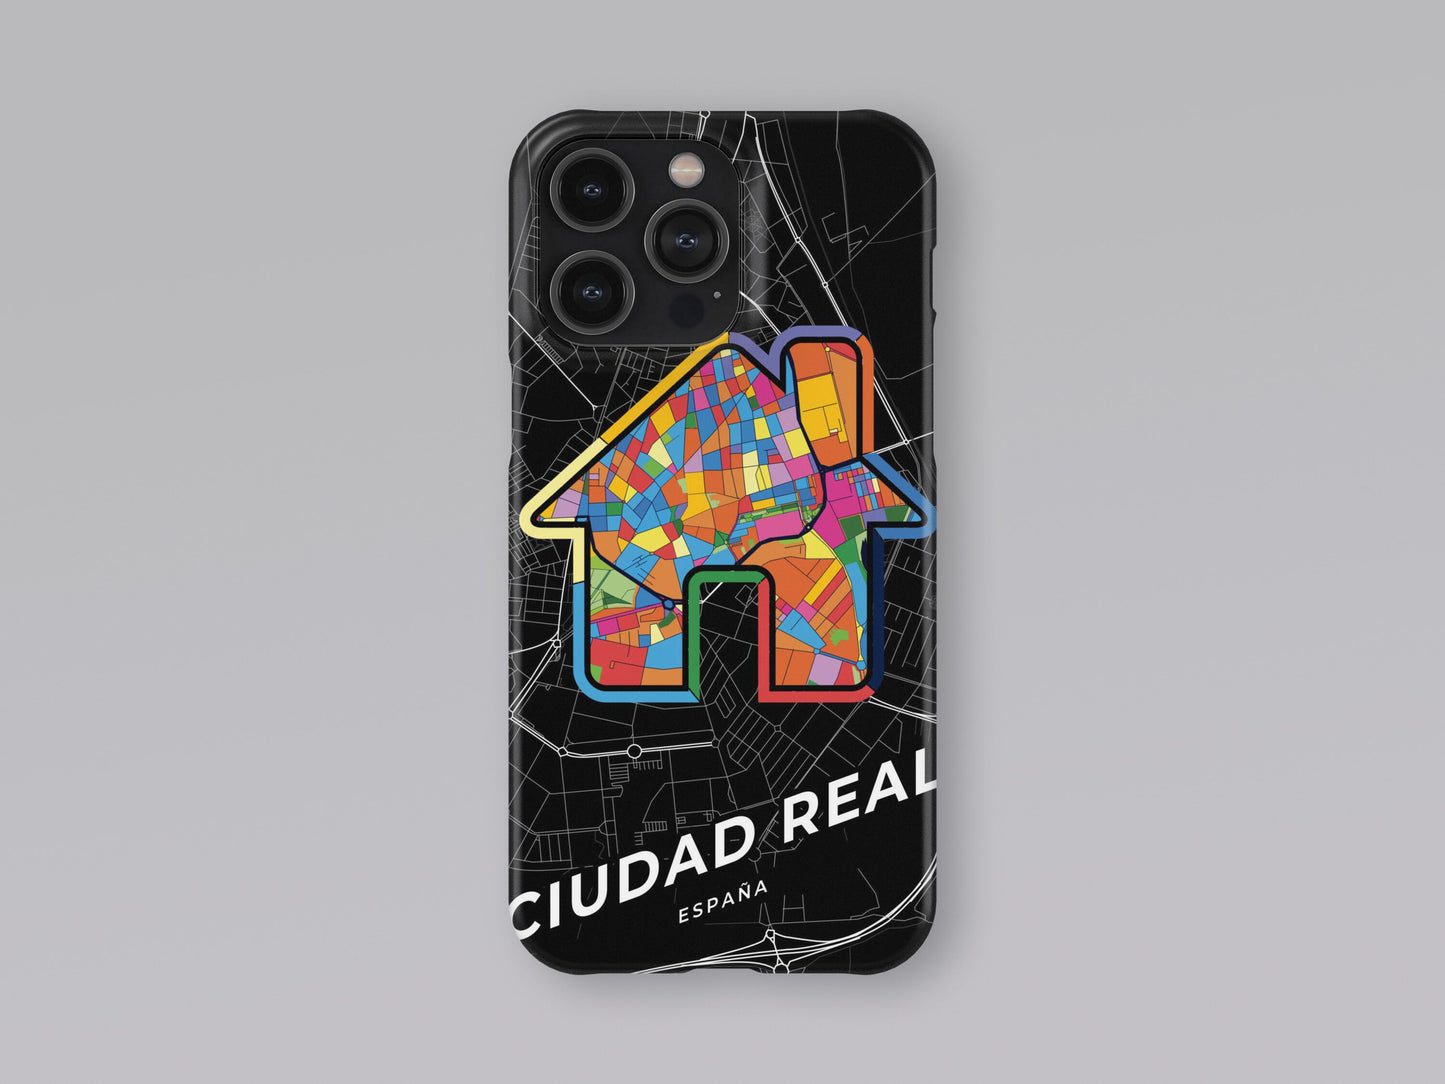 Ciudad Real Spain slim phone case with colorful icon. Birthday, wedding or housewarming gift. Couple match cases. 3